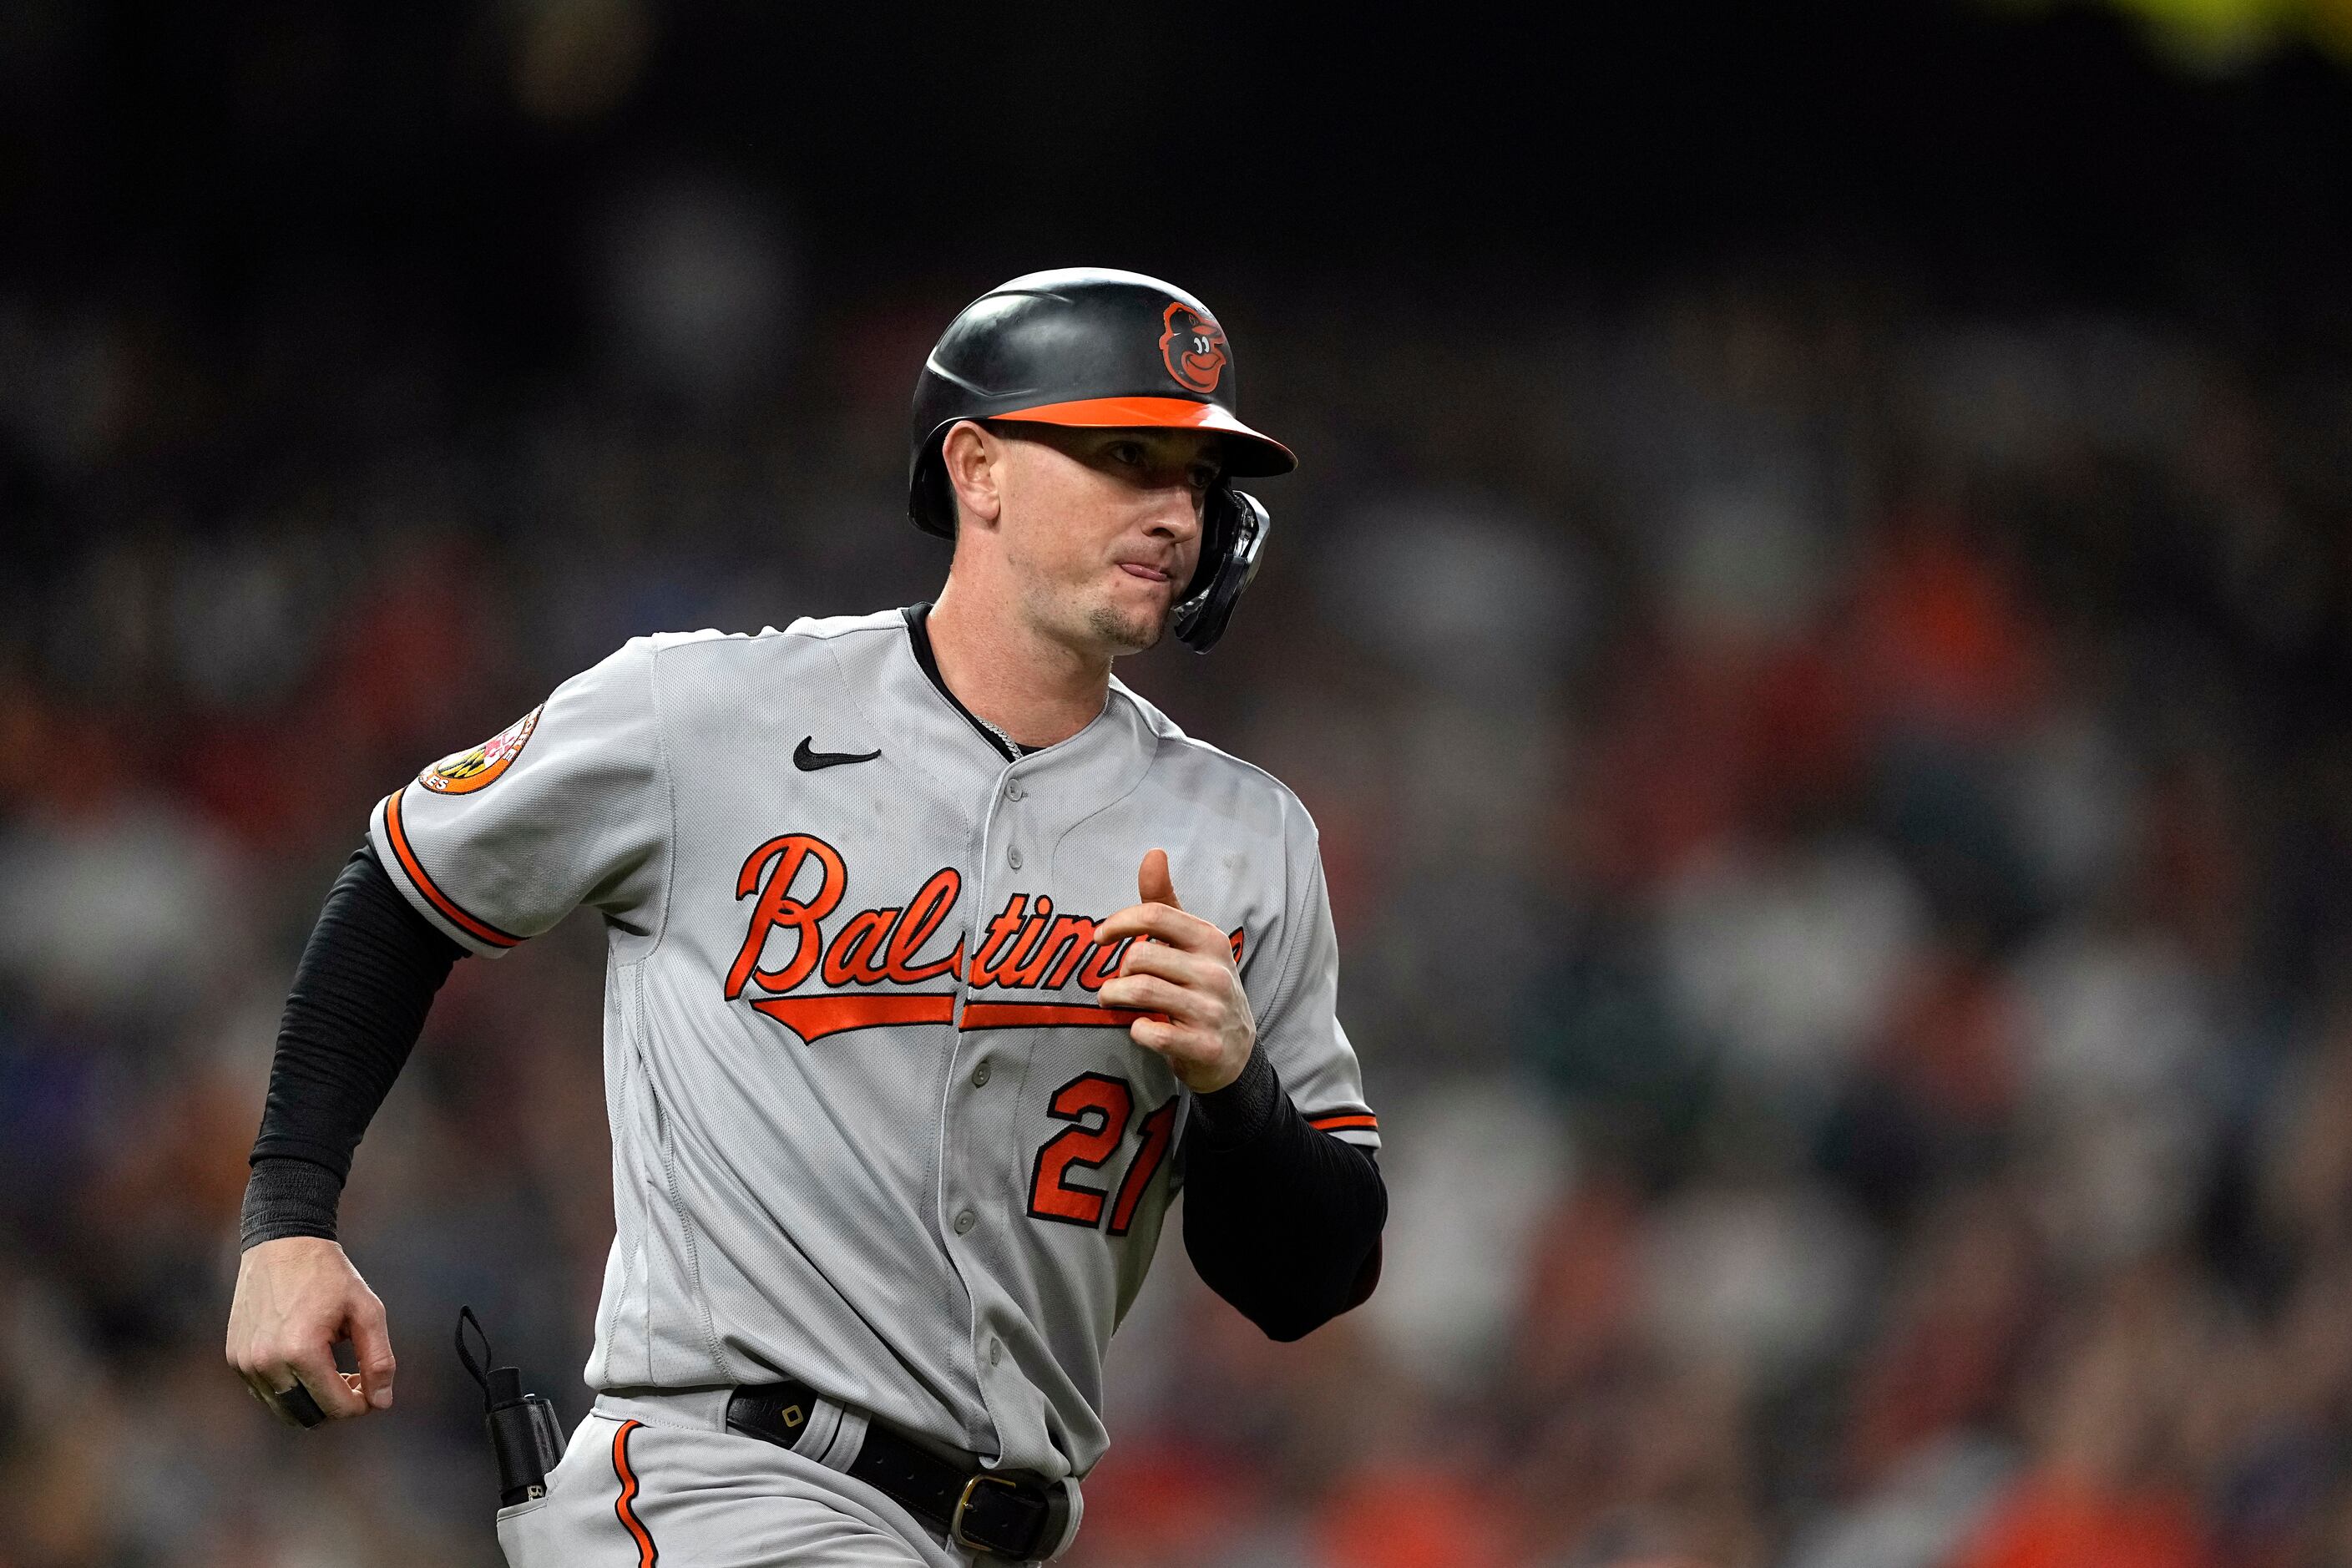 Hays' two homers lead Orioles to 9-5 win over slumping Astros